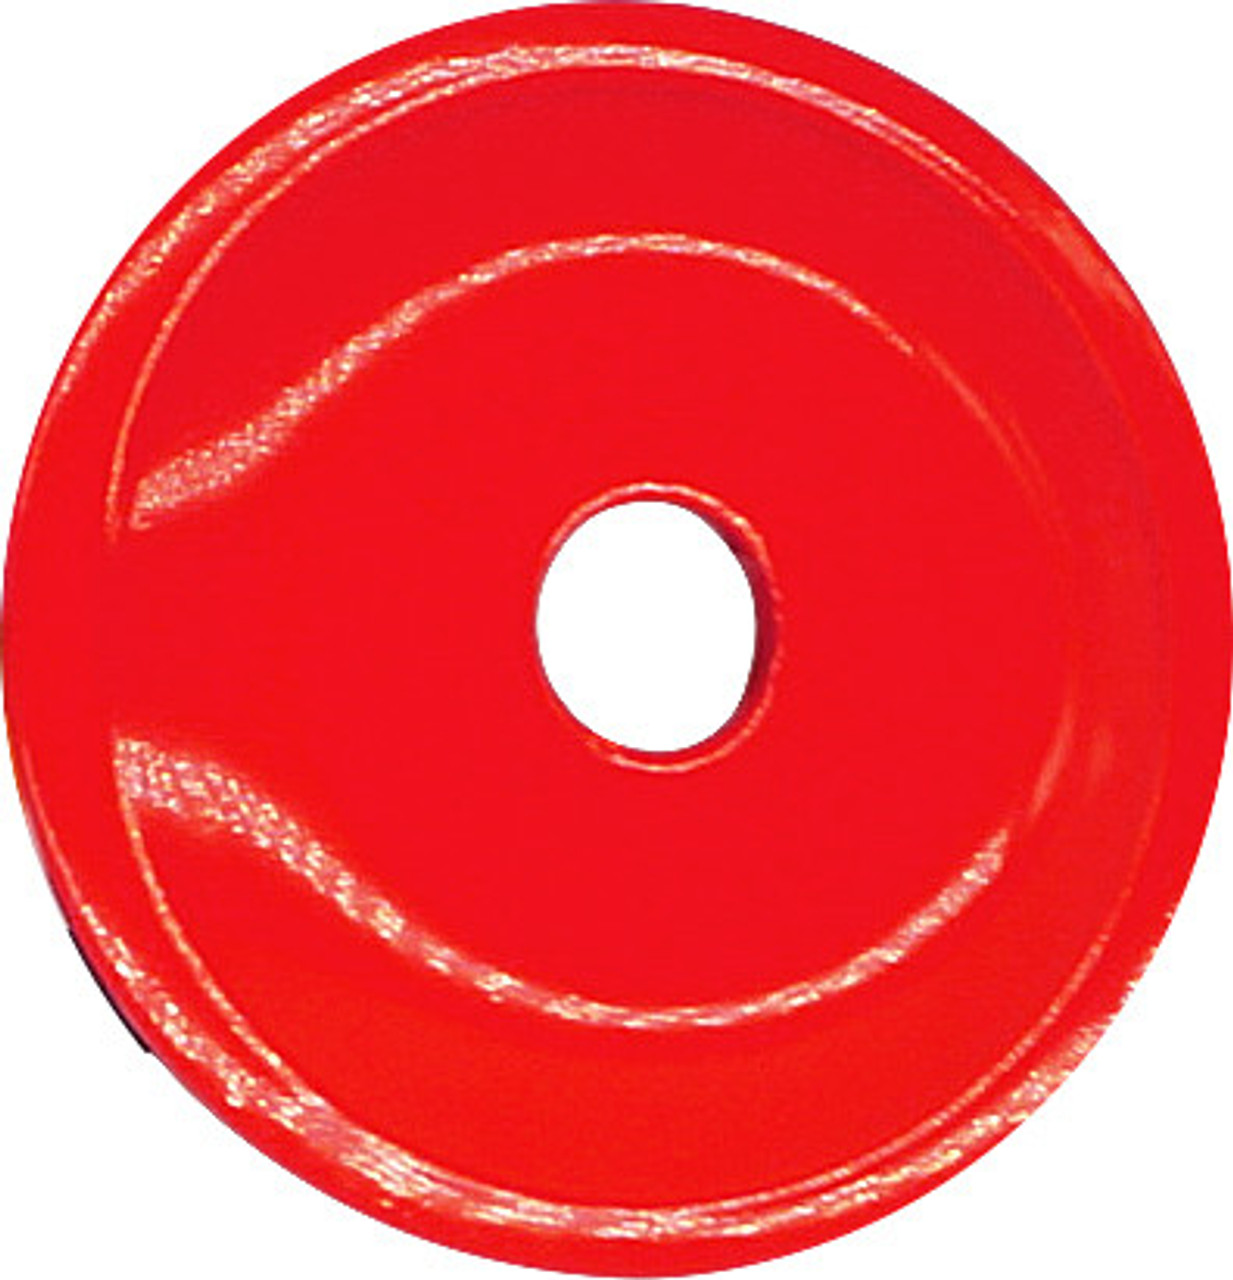 Woodys New Round Grand Digger Support Plate, 18-3290R-48